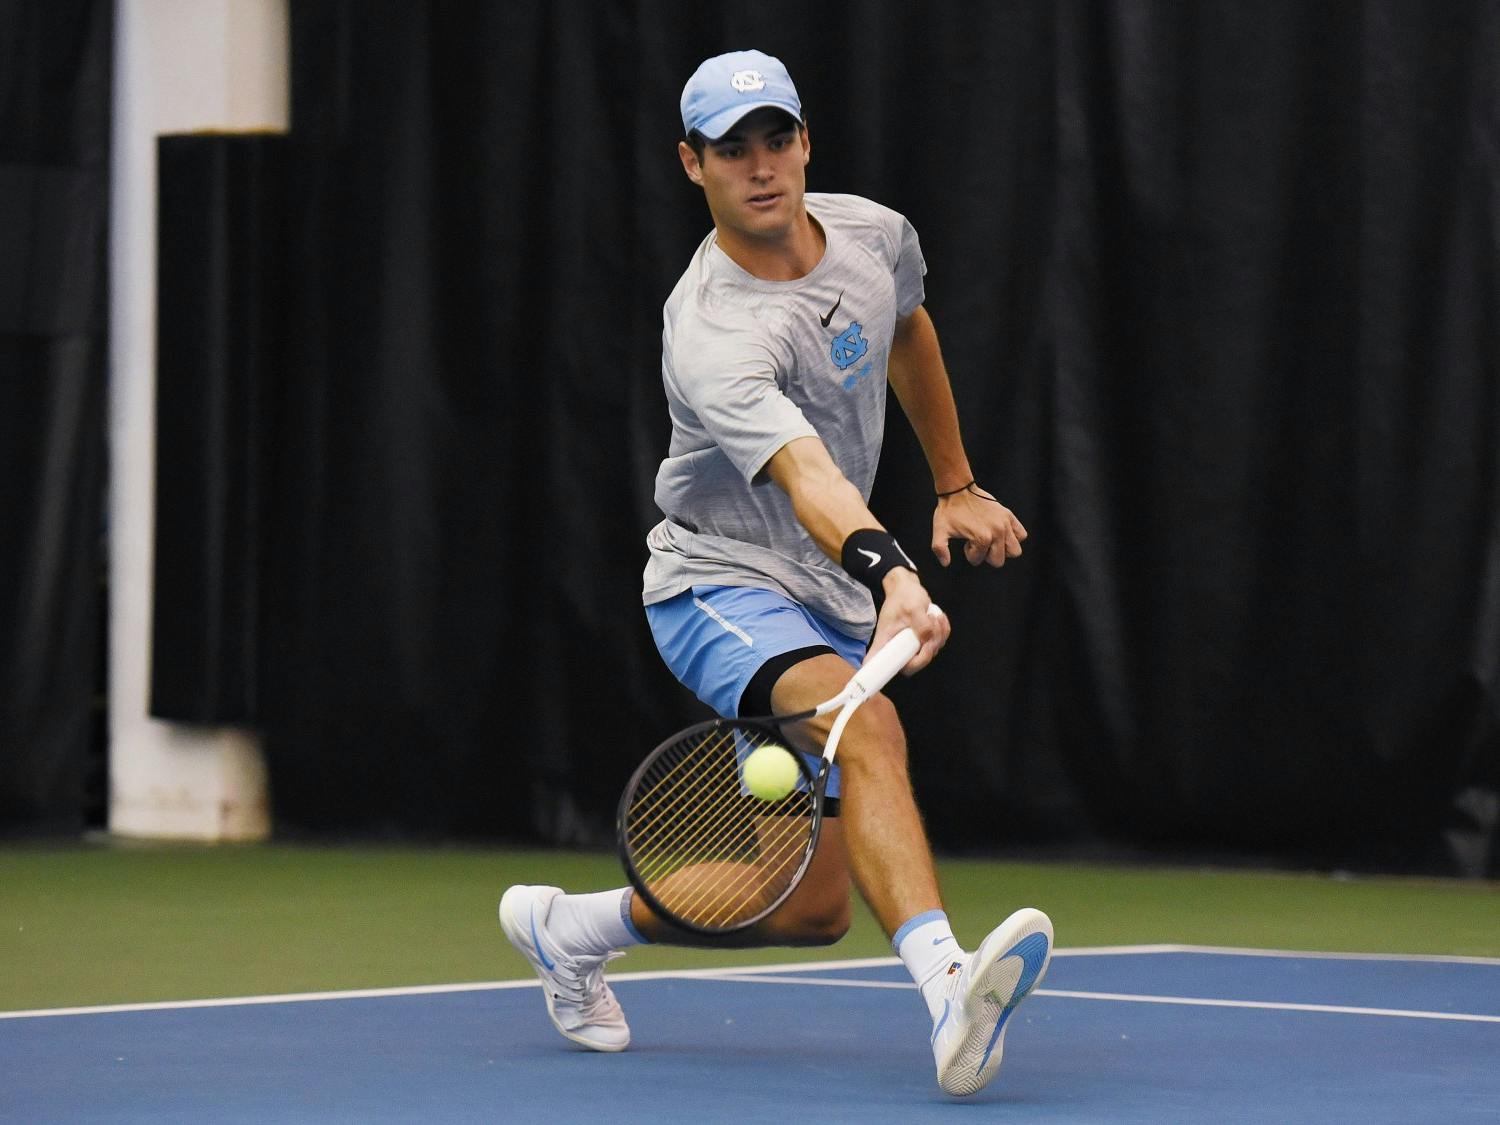 Ladd Harrison swings during a match against NCCU at the Cone-Kenfield Tennis Center on Saturday, Jan. 18, 2020. Photo courtesy of Rebecca Lawson/GoHeels.